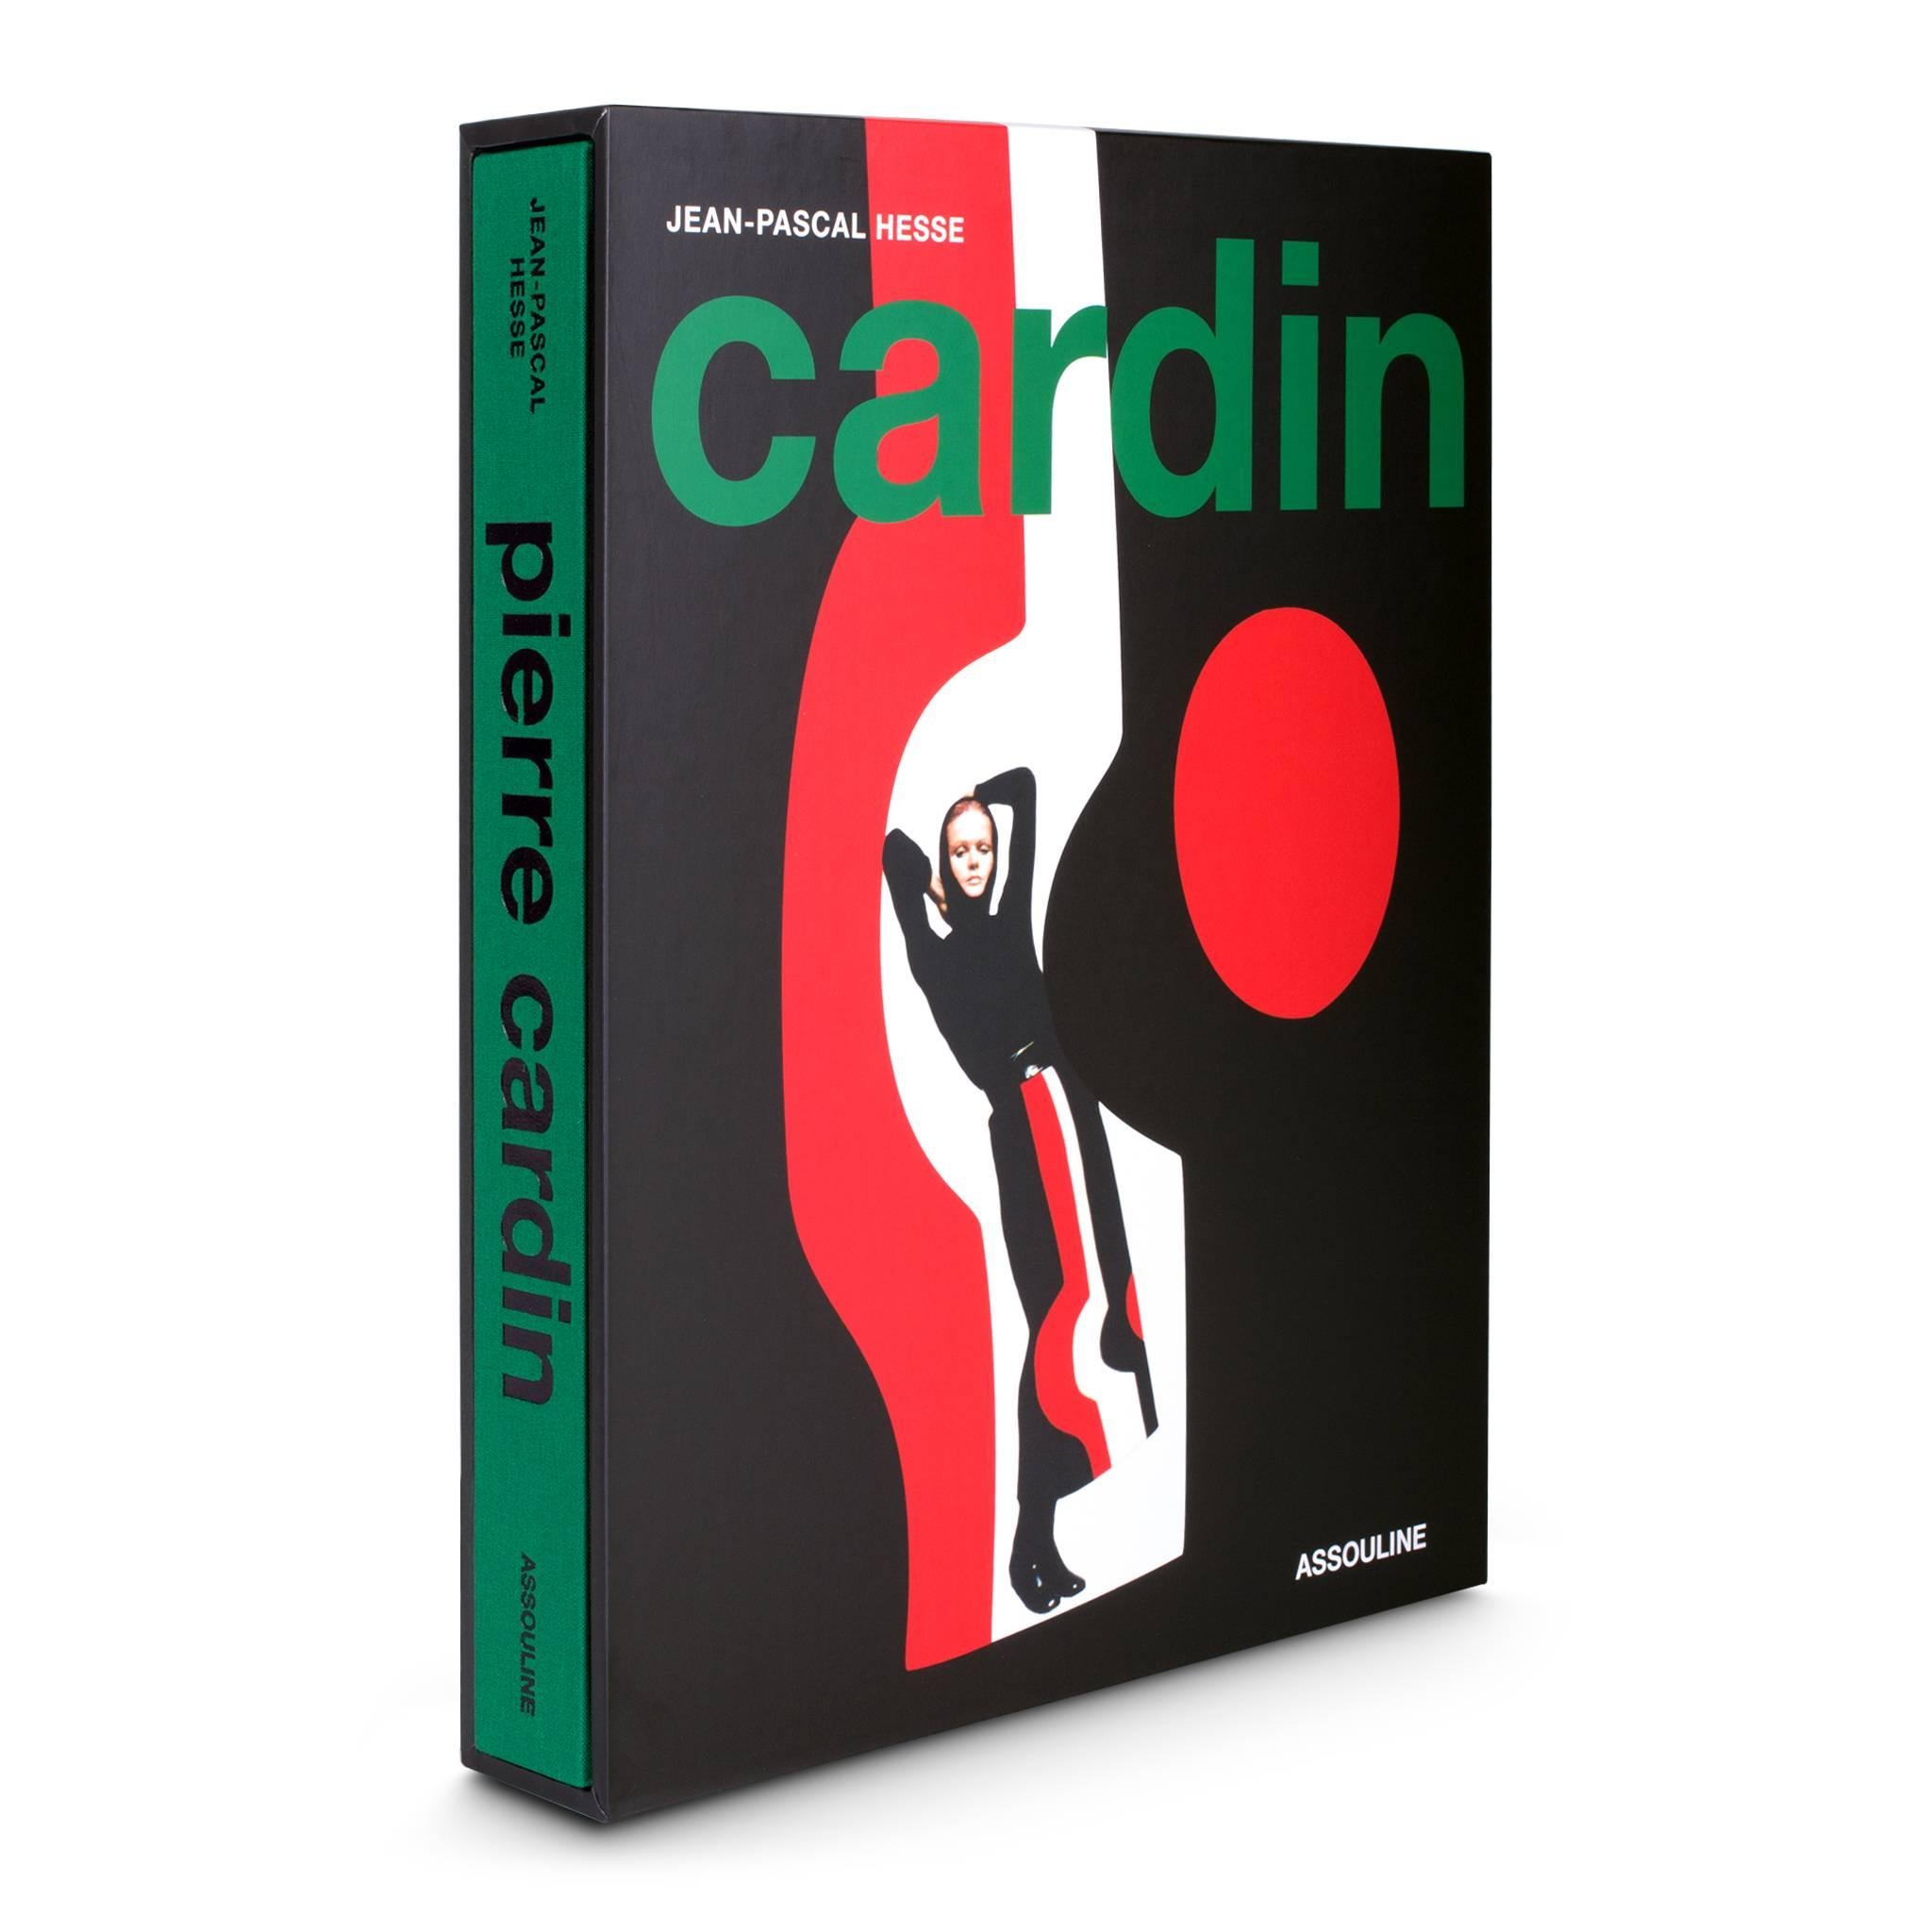 Legendary French fashion designer Pierre Cardin celebrates 70 years of creation. A global citizen, he remains a vital personality today, with an essential brand established in 110 countries around the world. This visionary couturier’s unique and